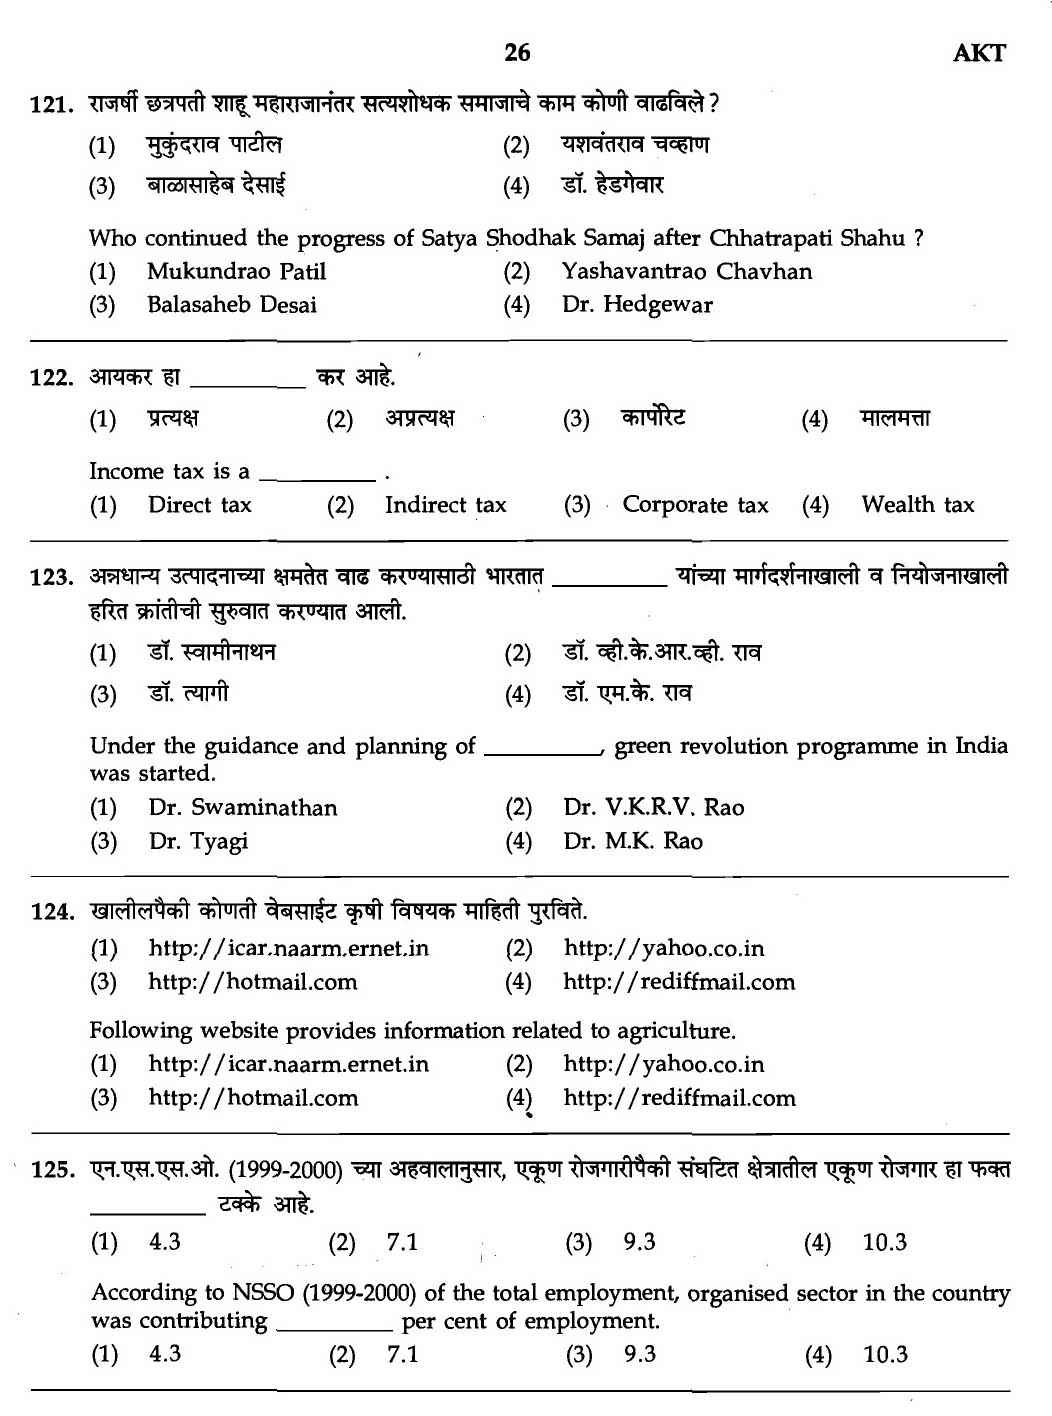 MPSC Agricultural Services Exam 2007 General Question Paper 24